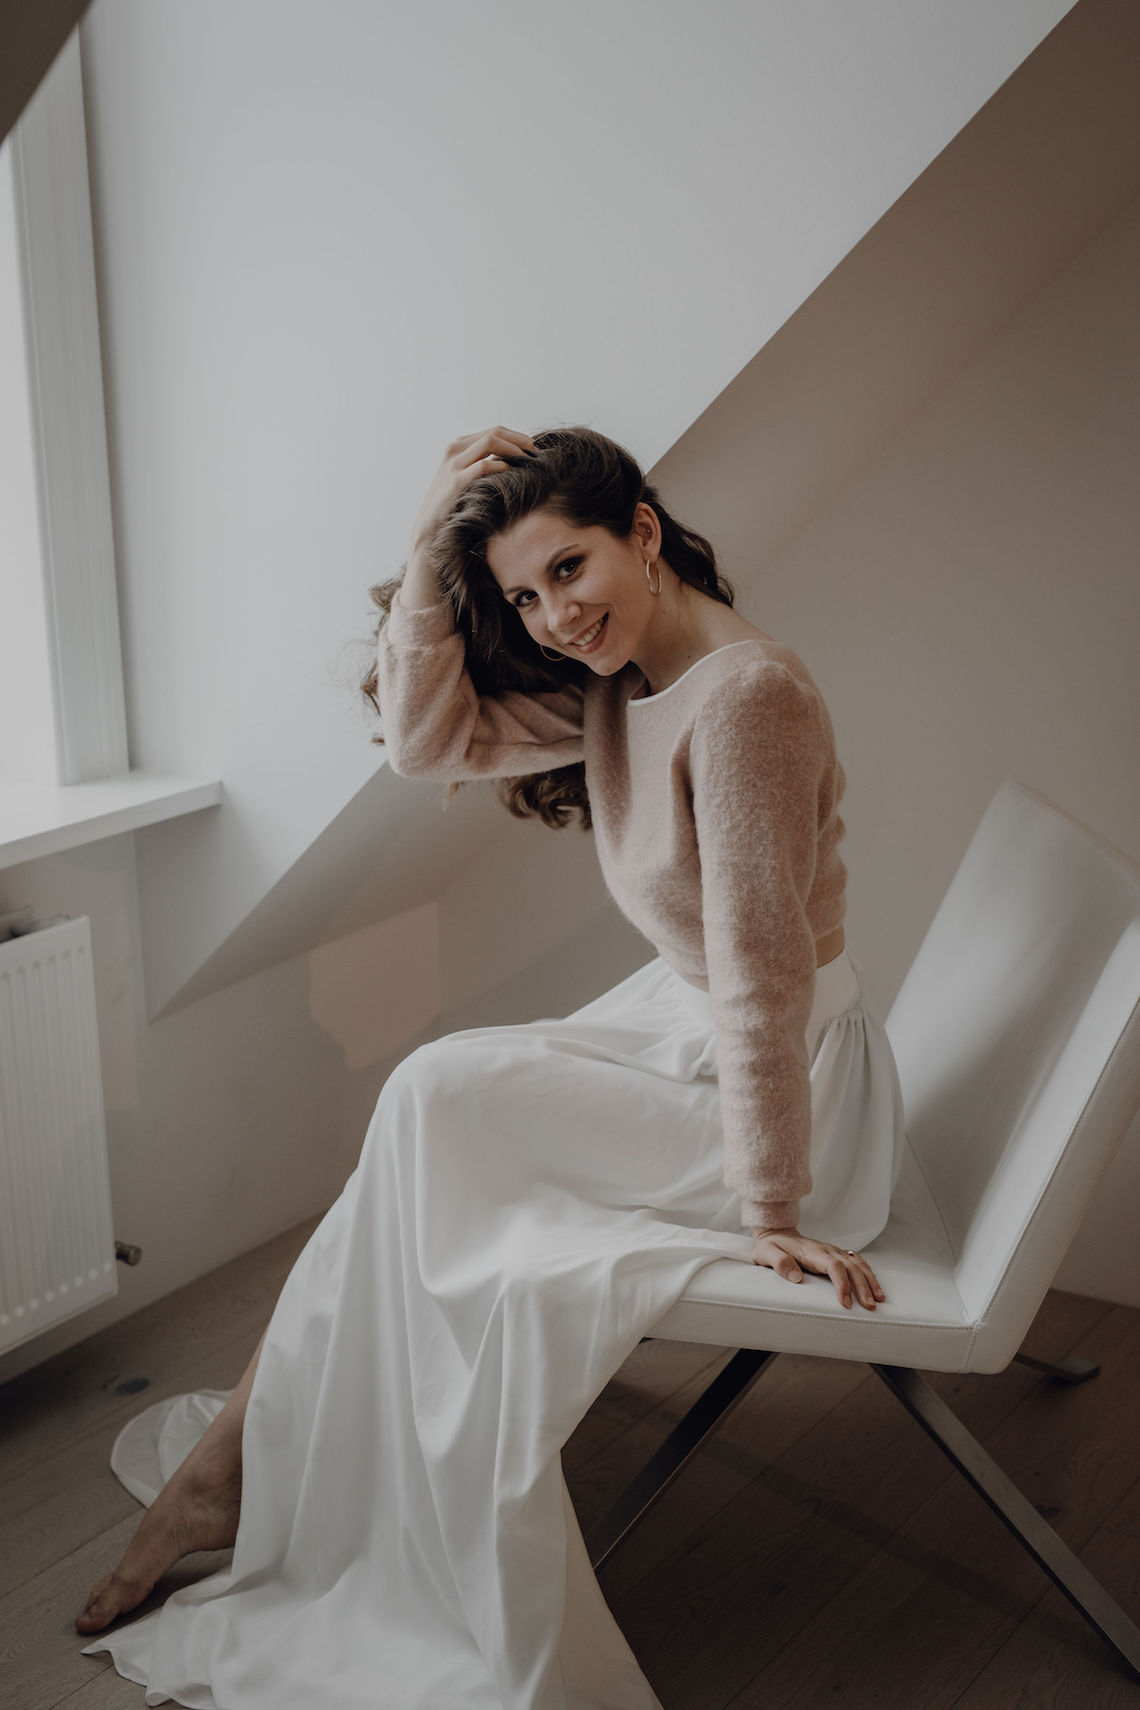 Wild Winter Wedding Inspiration from Iceland – Snowy Scenery and a Bridal Sweater – Melanie Munoz Photography 10